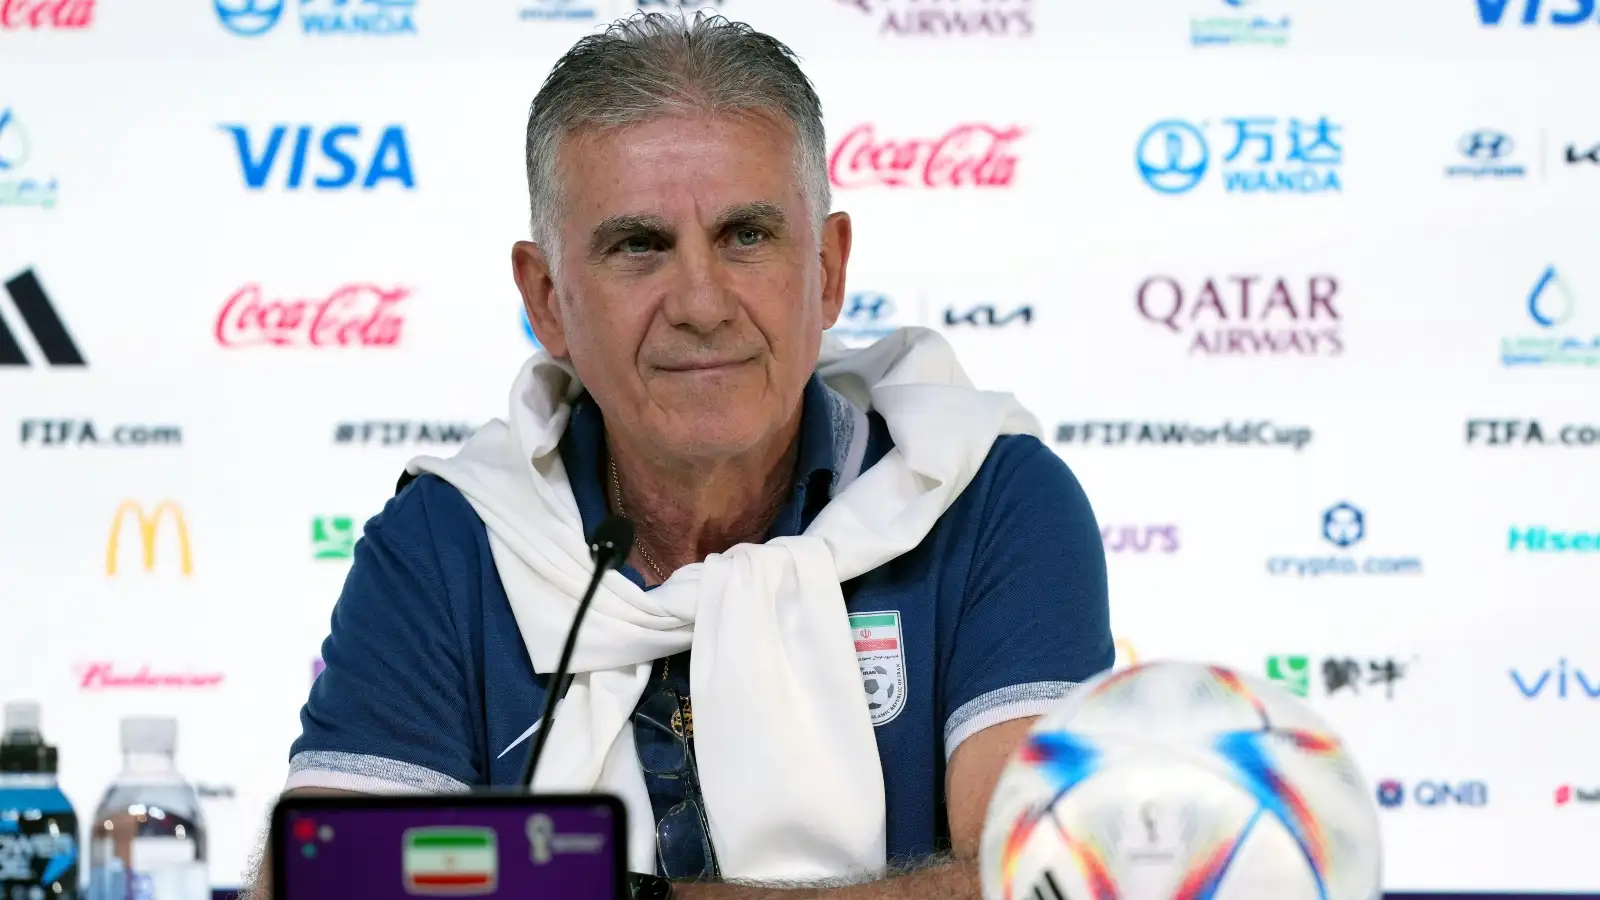 Carlos Queiroz during a press conference